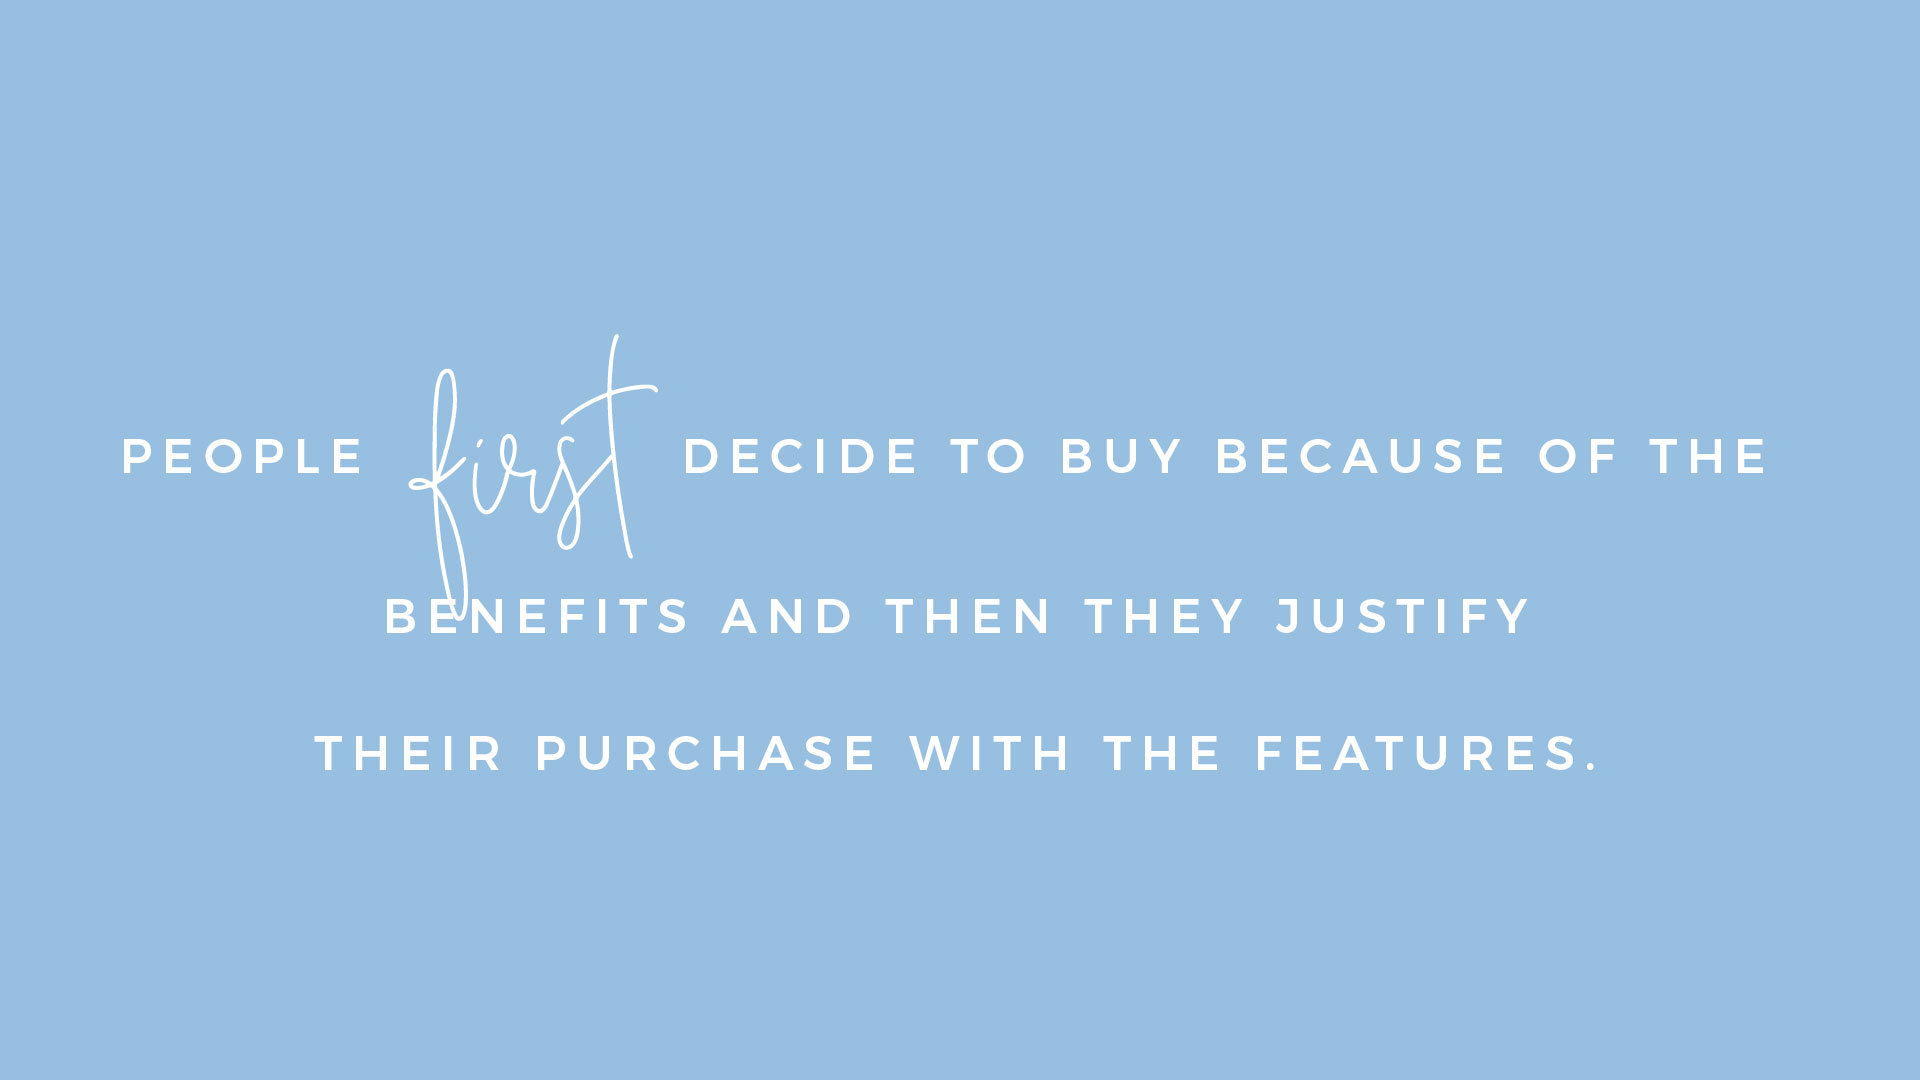 People first decide to buy because of the benefits and then they justify their purchase with the features.